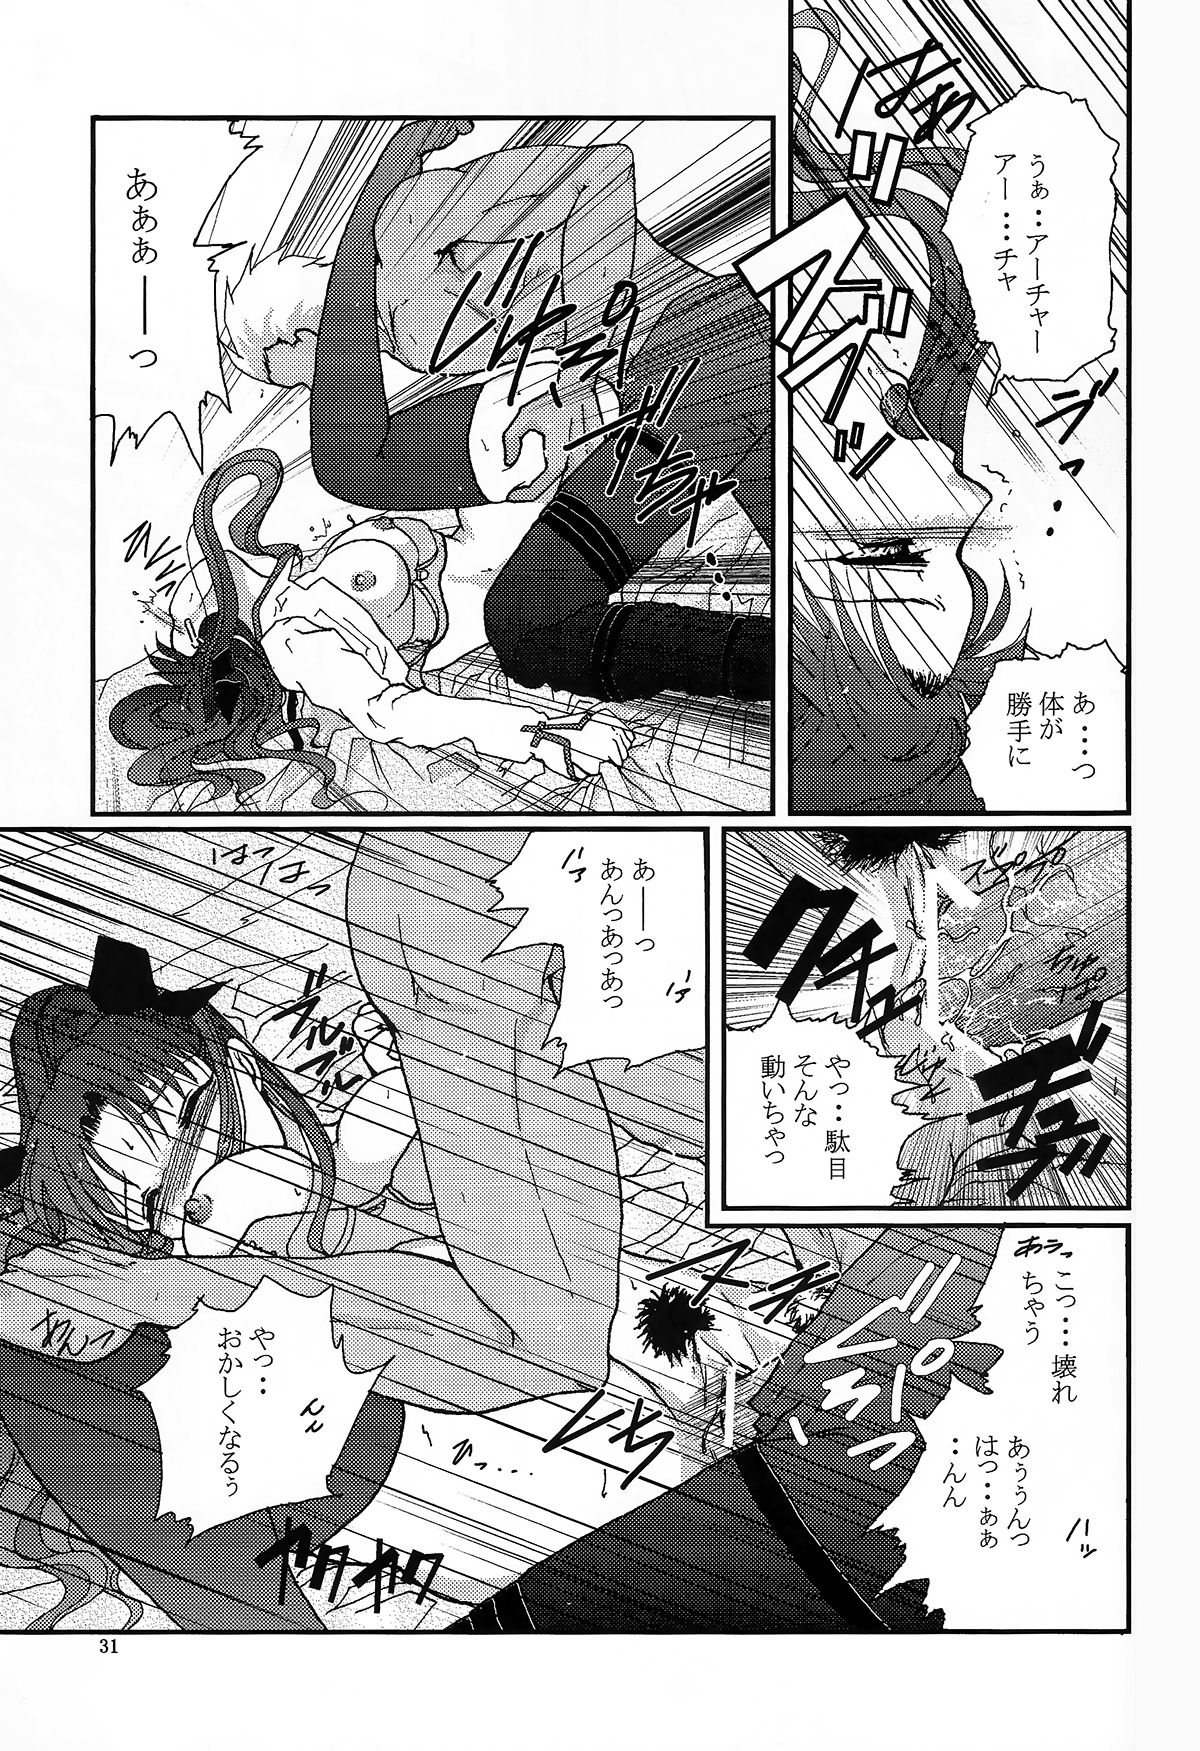 (SC24) [Takeda Syouten (Takeda Sora)] Question-7 (Fate/stay night) page 29 full